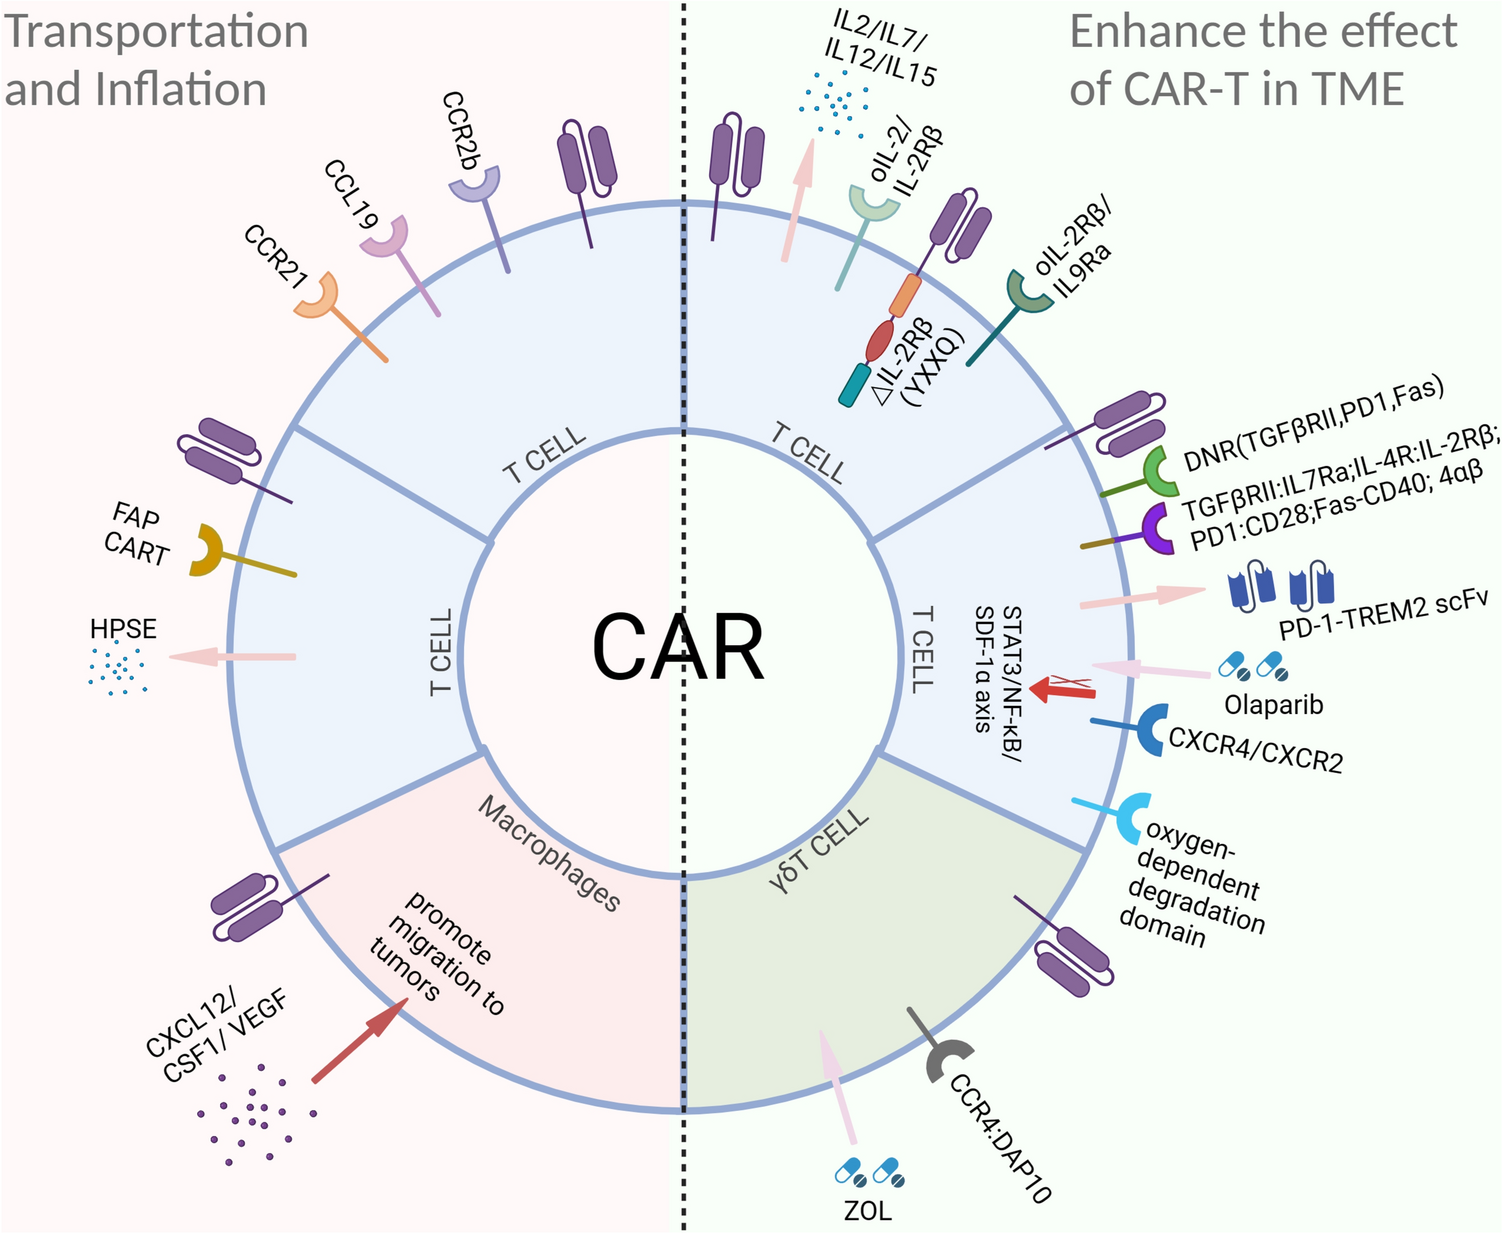 Challenges and strategies in relation to effective CAR-T cell immunotherapy for solid tumors